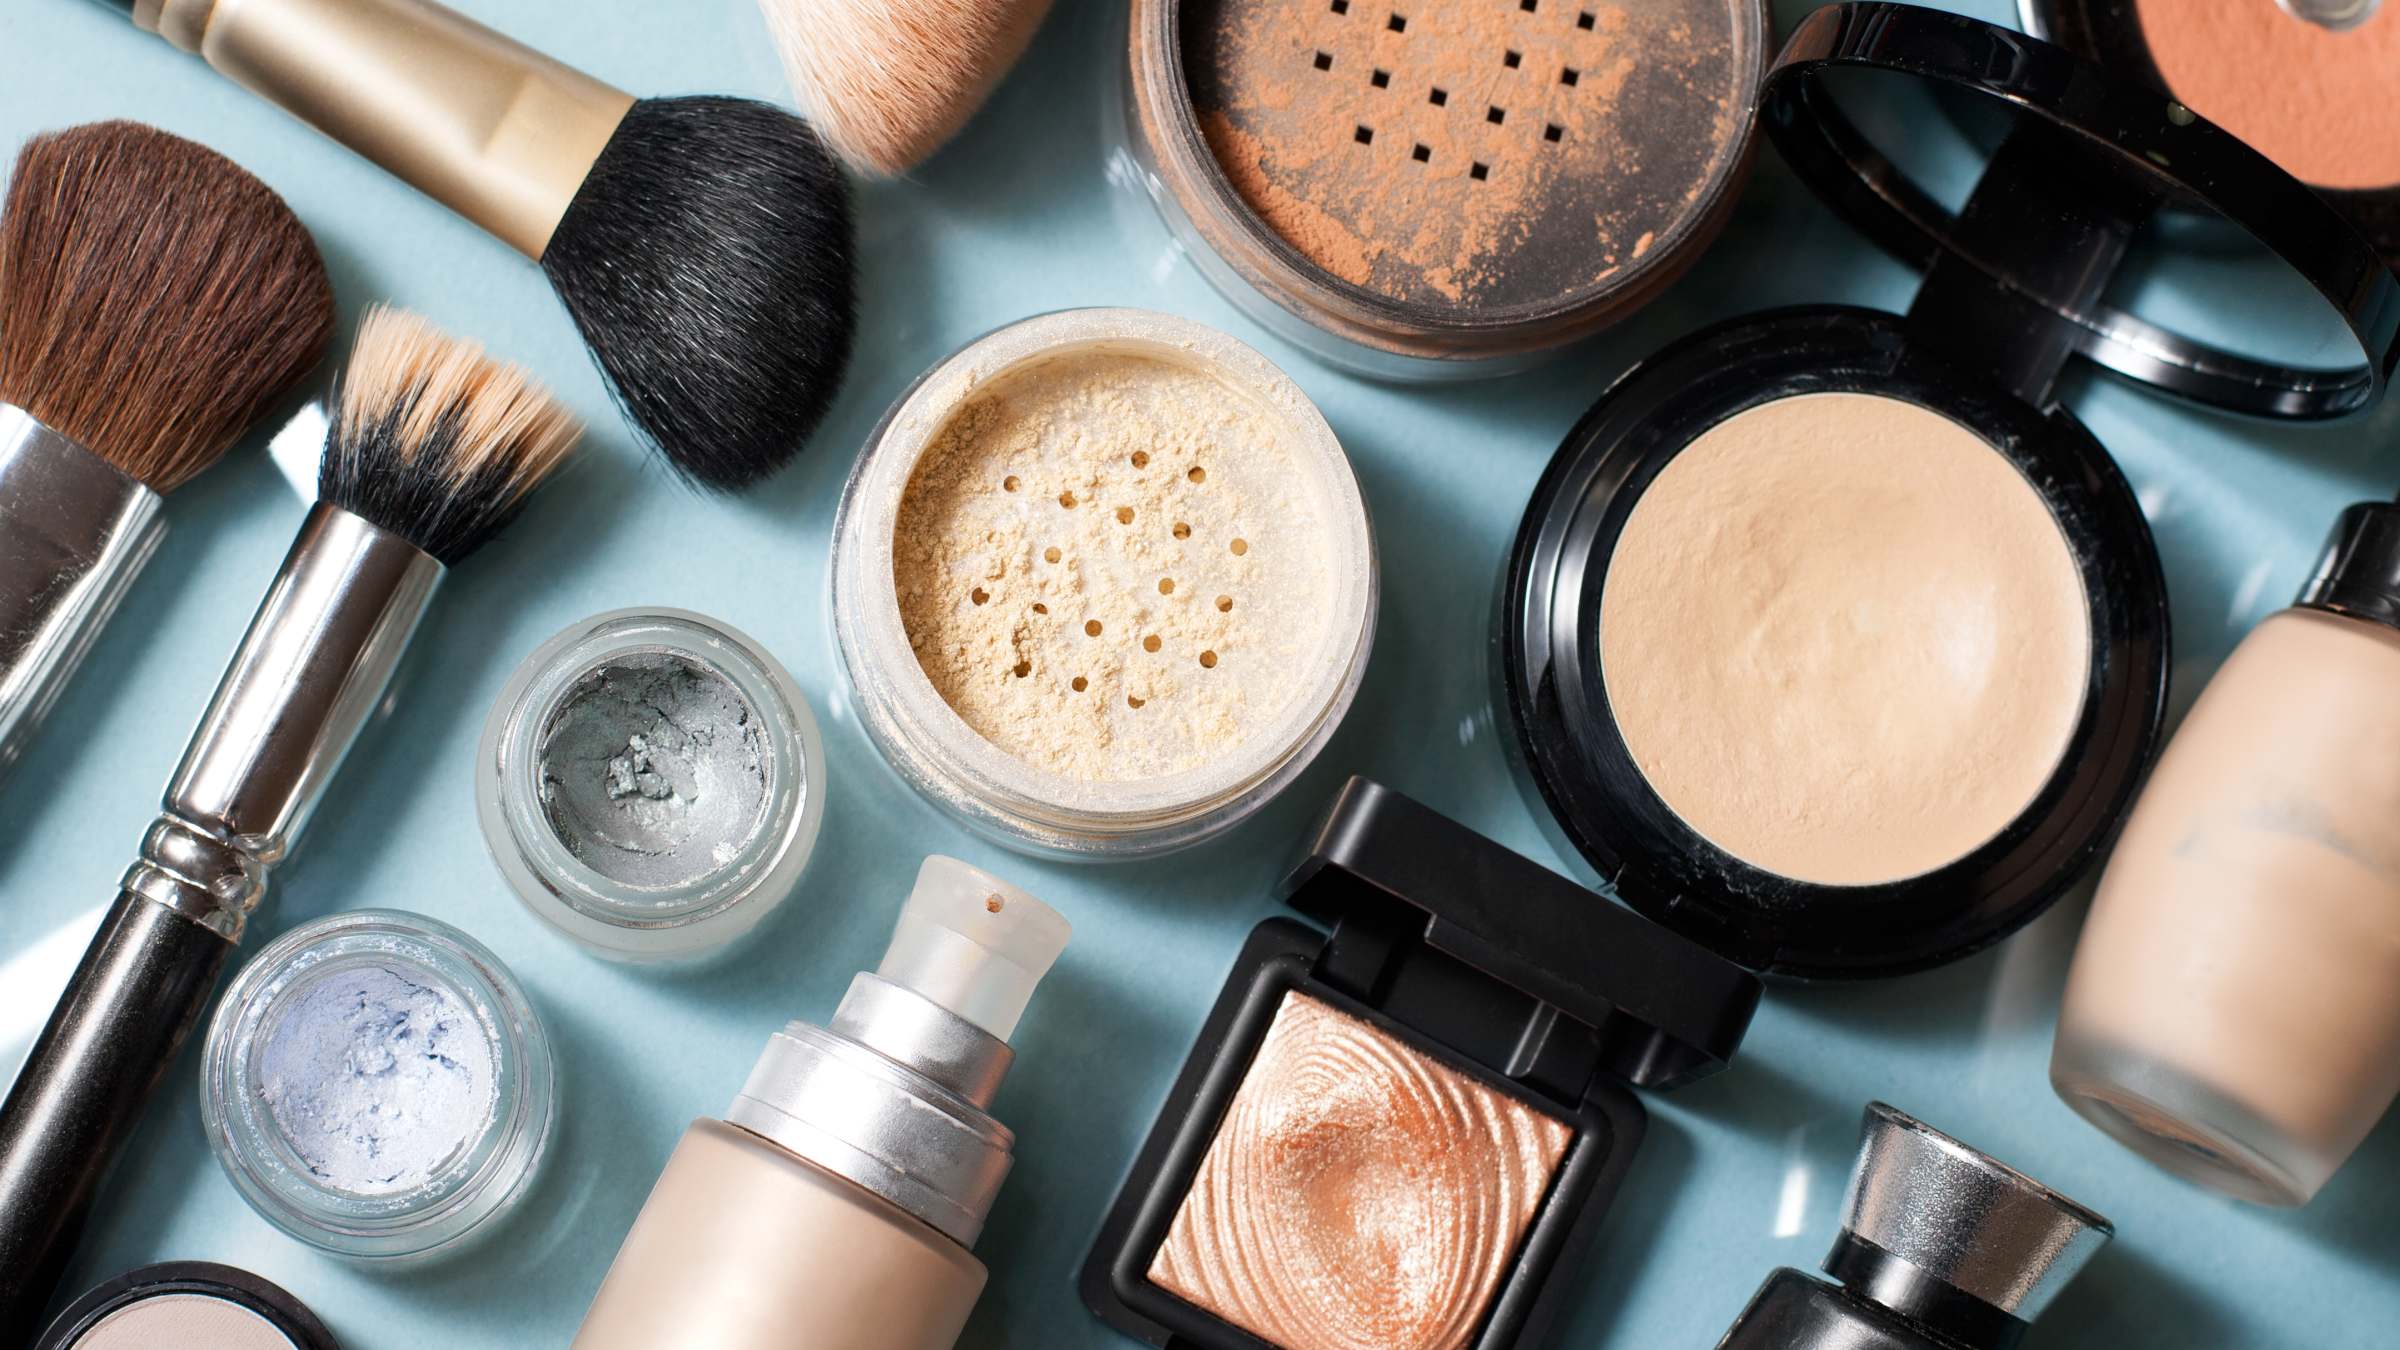 Can you use expired makeup? Ohio State Health and Discovery image